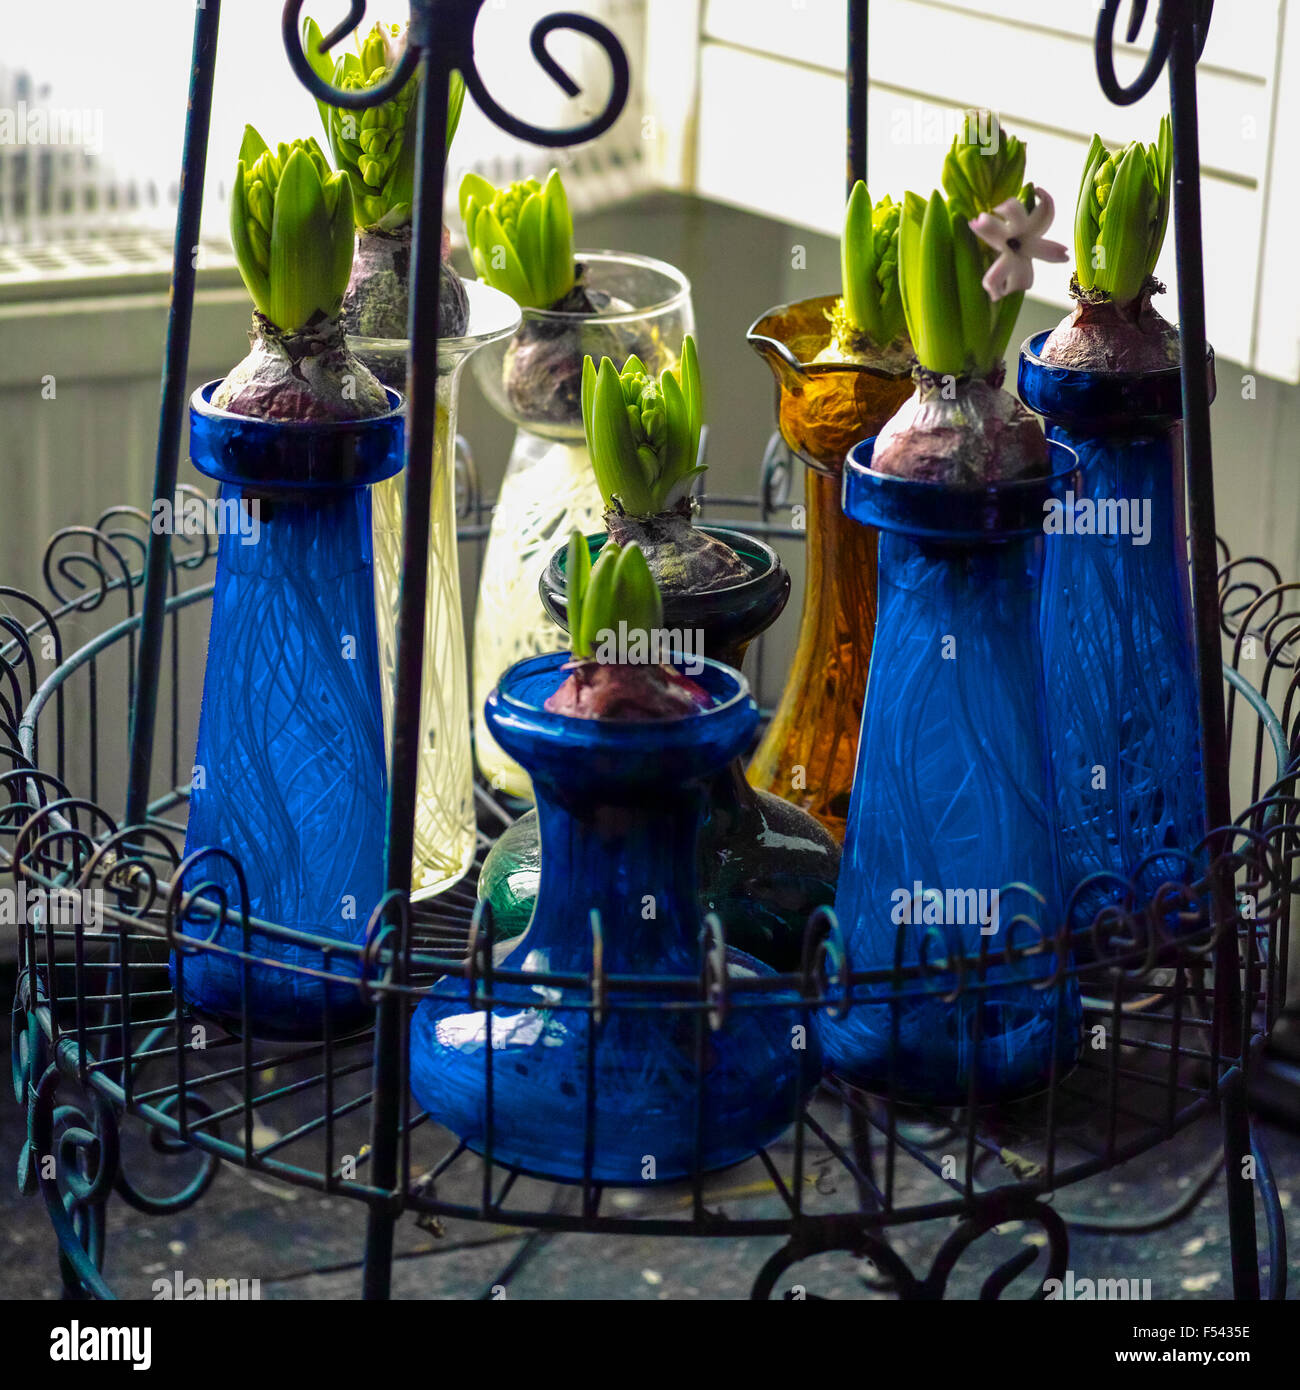 Hyacinths growing in glass hyacinth vases close to blooming in time for Christmas Stock Photo